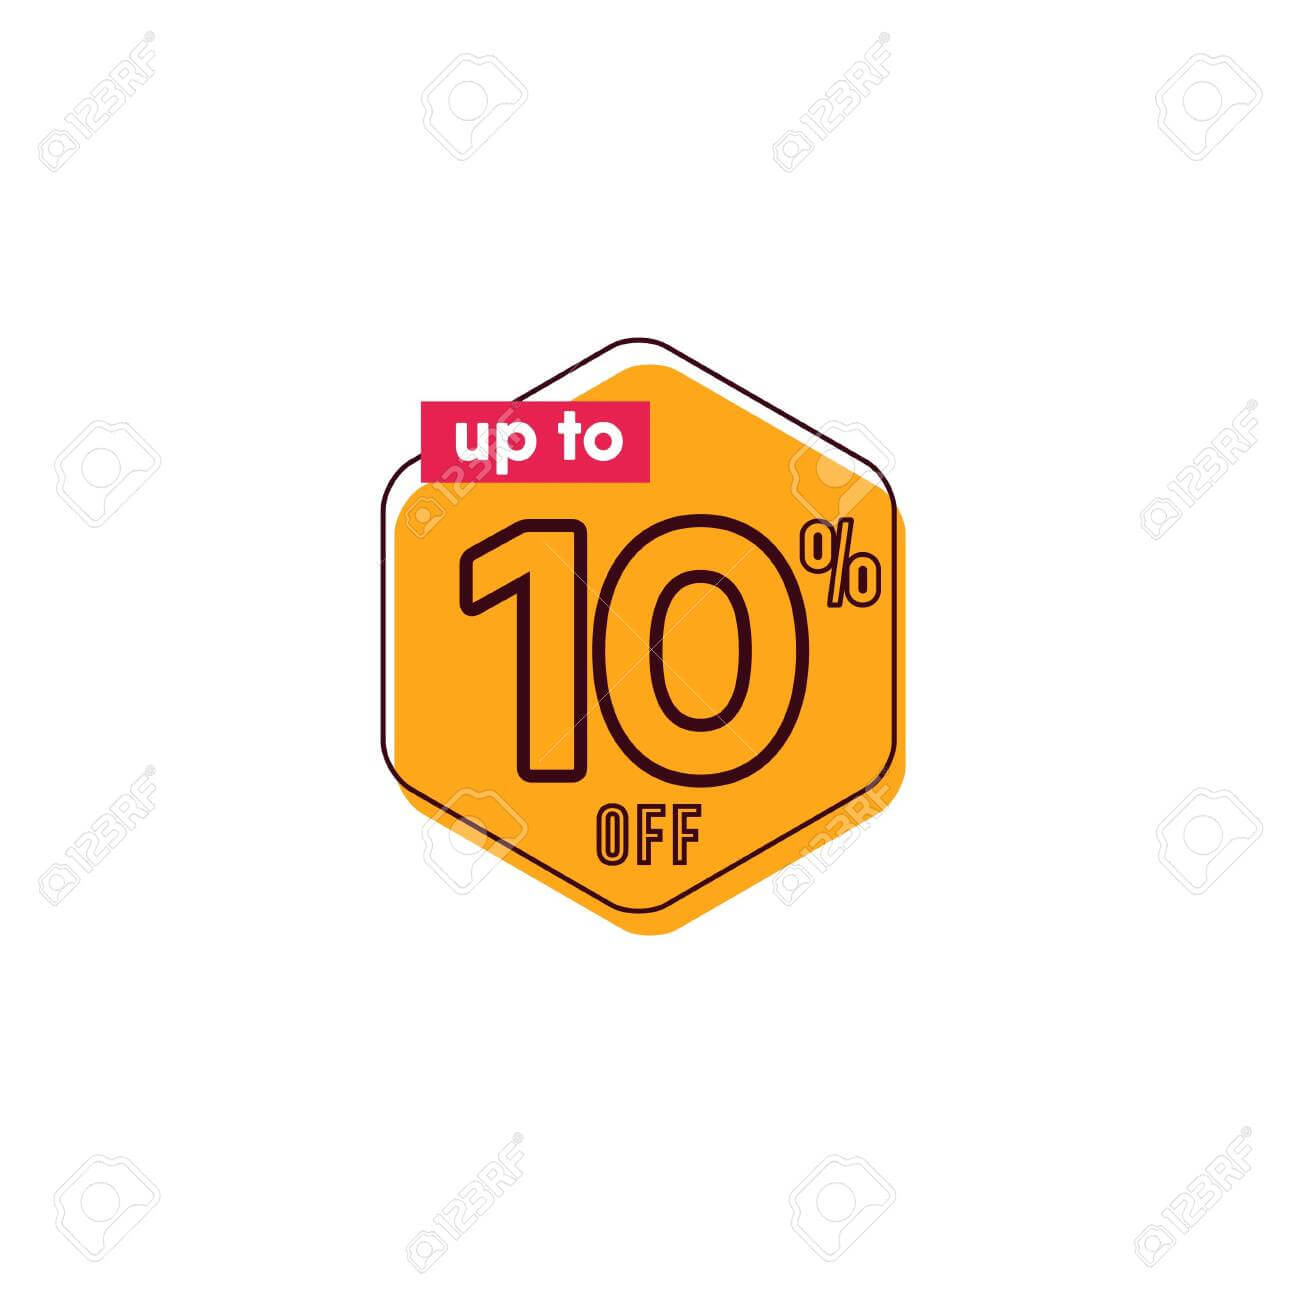 Discount Up To 10% Off Label Vector Template Design Illustration Inside 10 Up Label Template